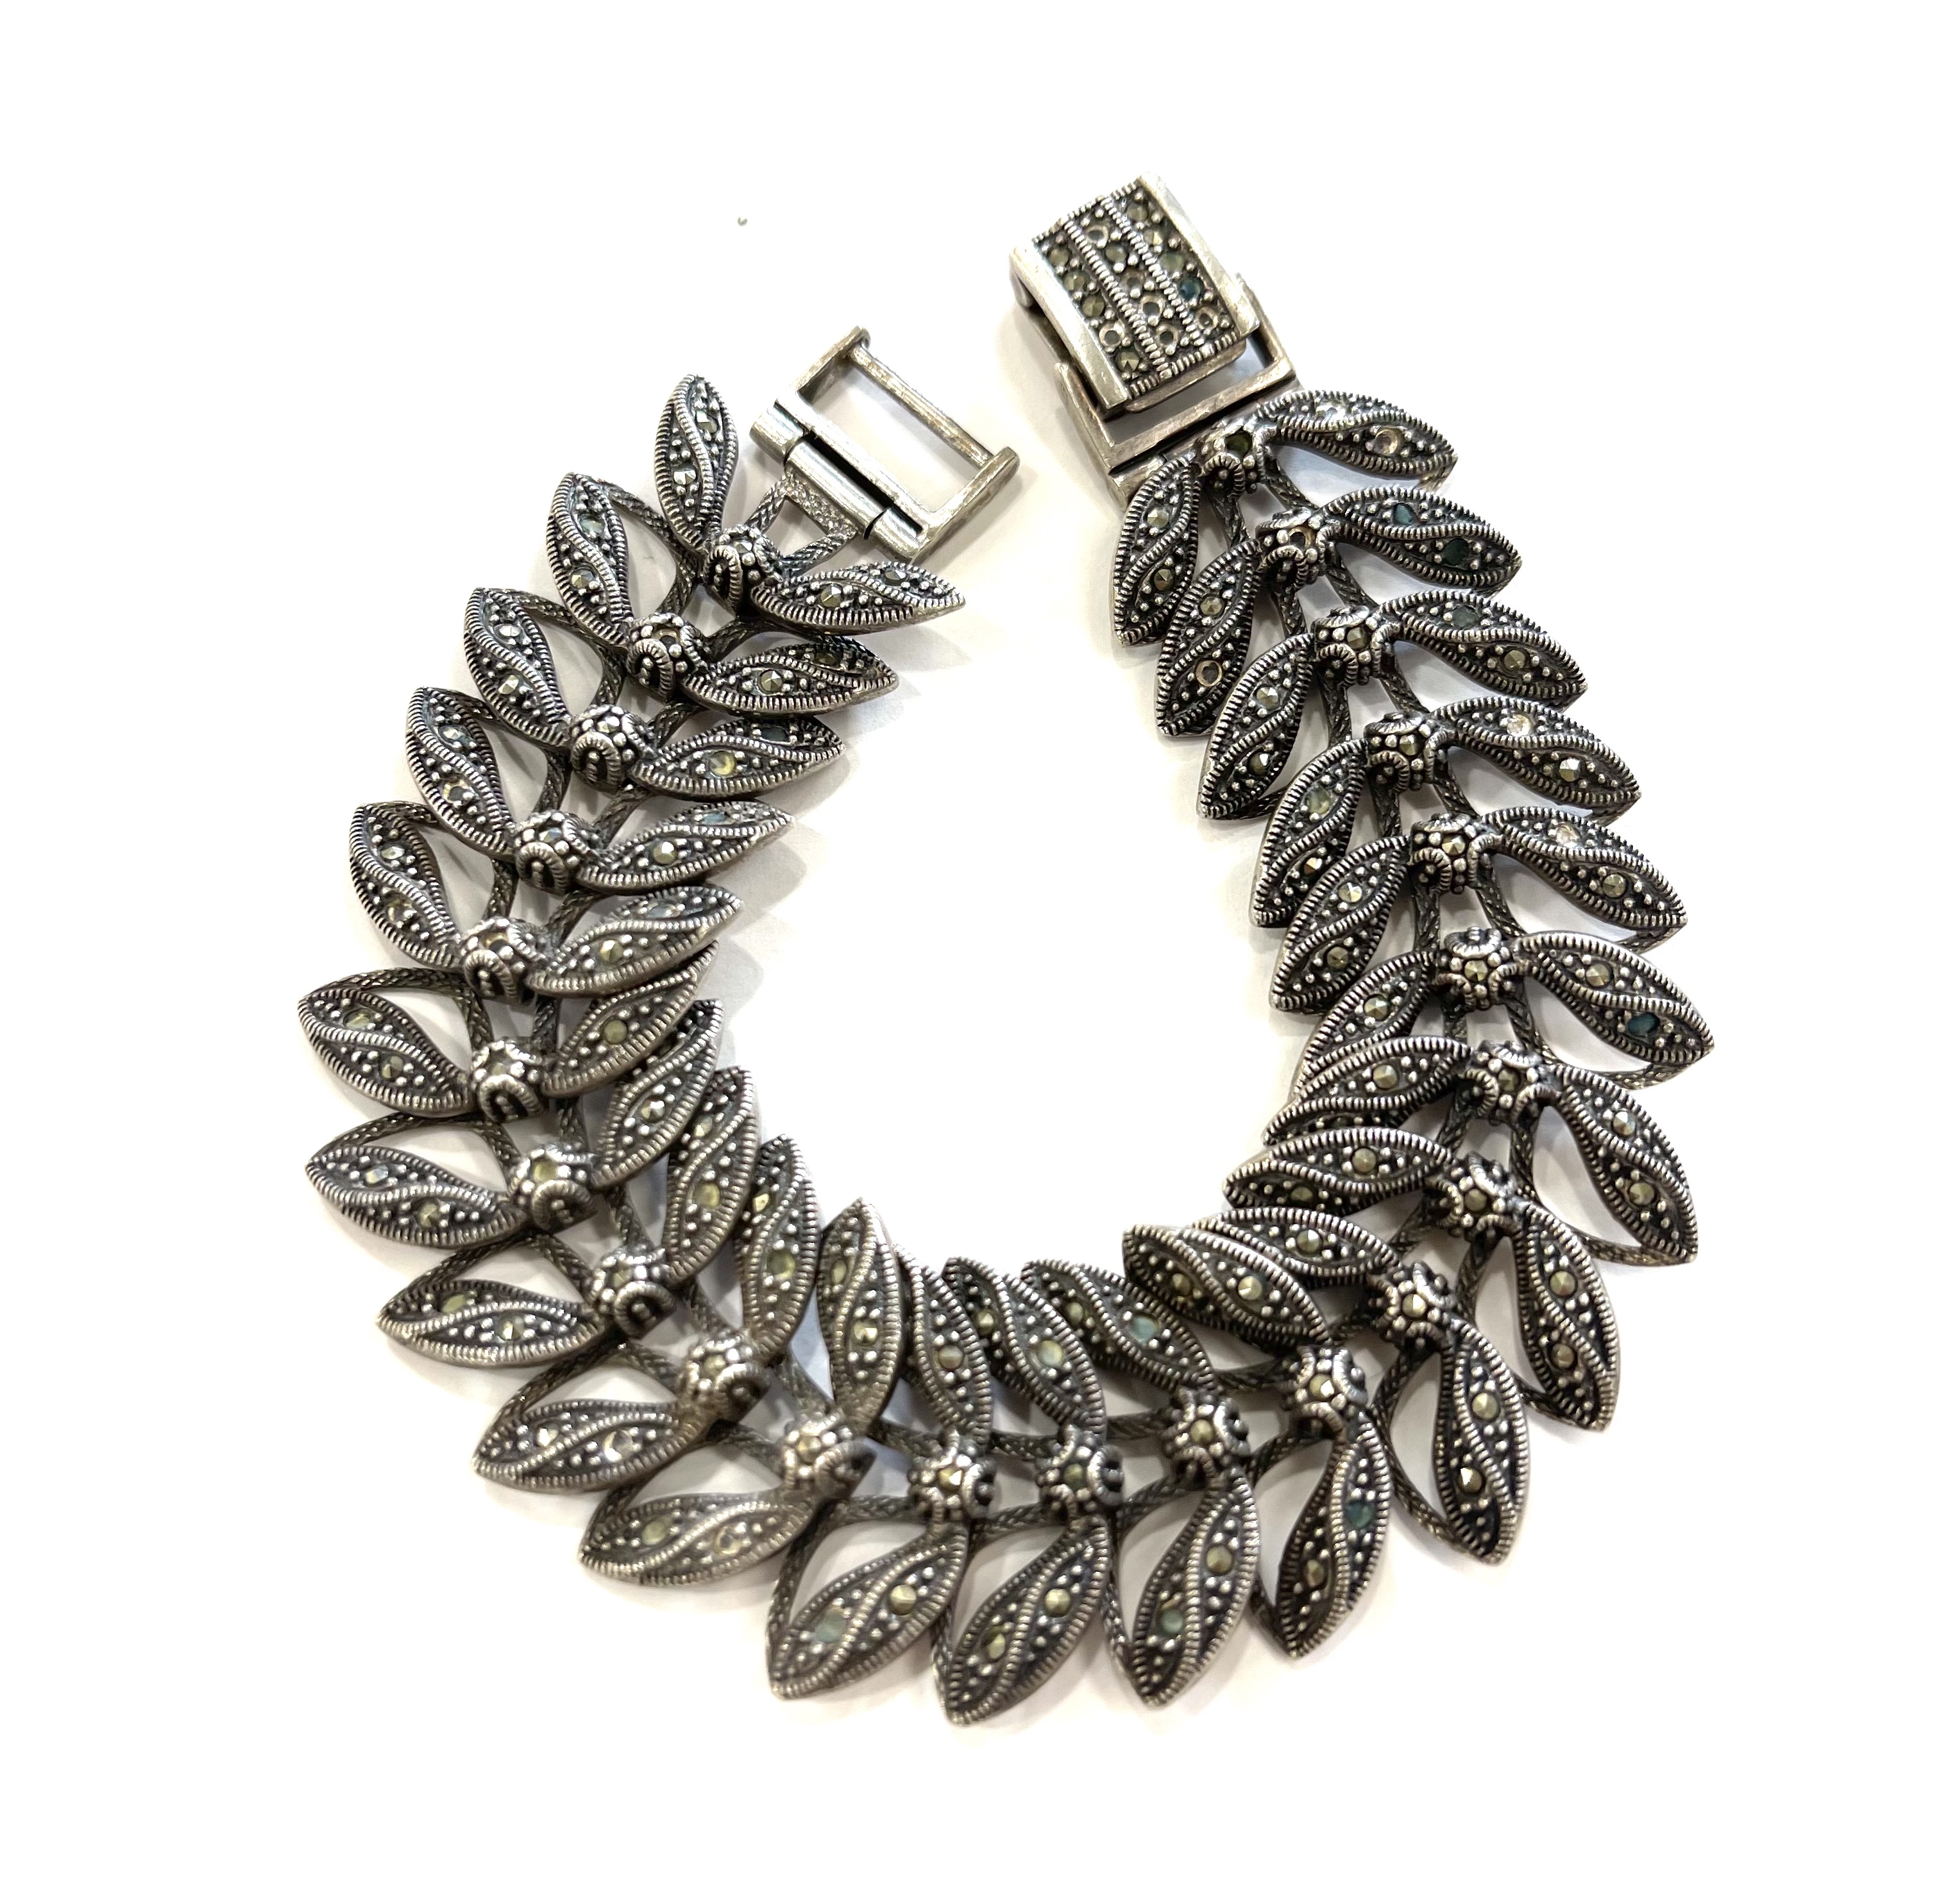 Vintage silver and marcasite bracelet missing some marcasite stones hallmarked 925 weight 45g